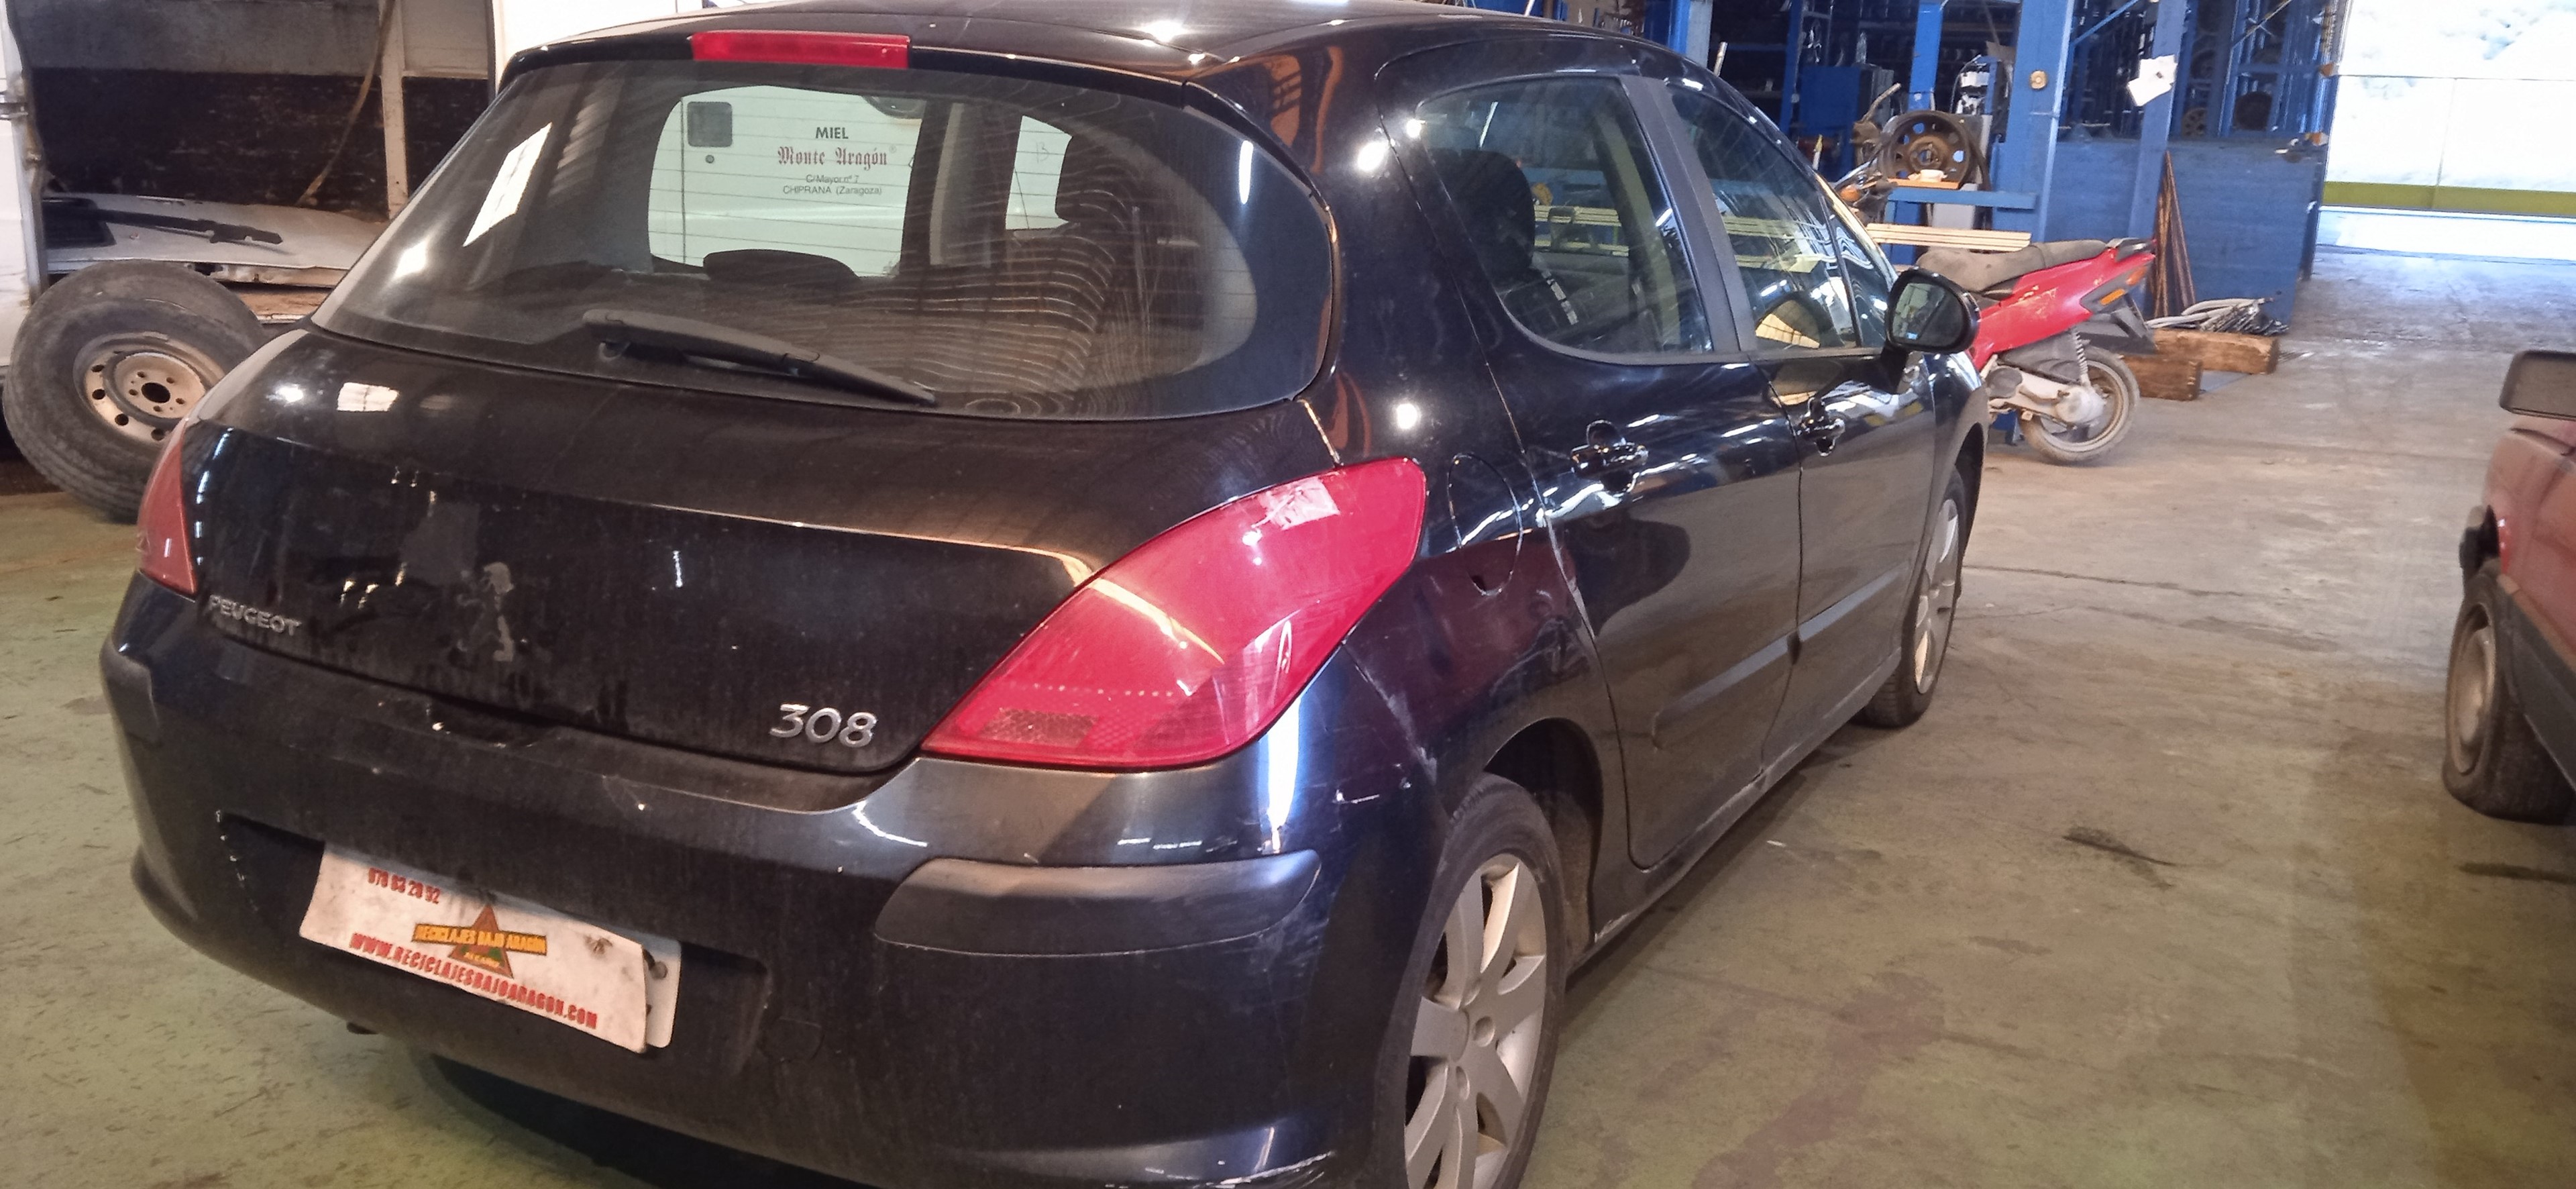 JUEGO ASIENTOS COMPLETO PEUGEOT 308 1.6 HDi FAP